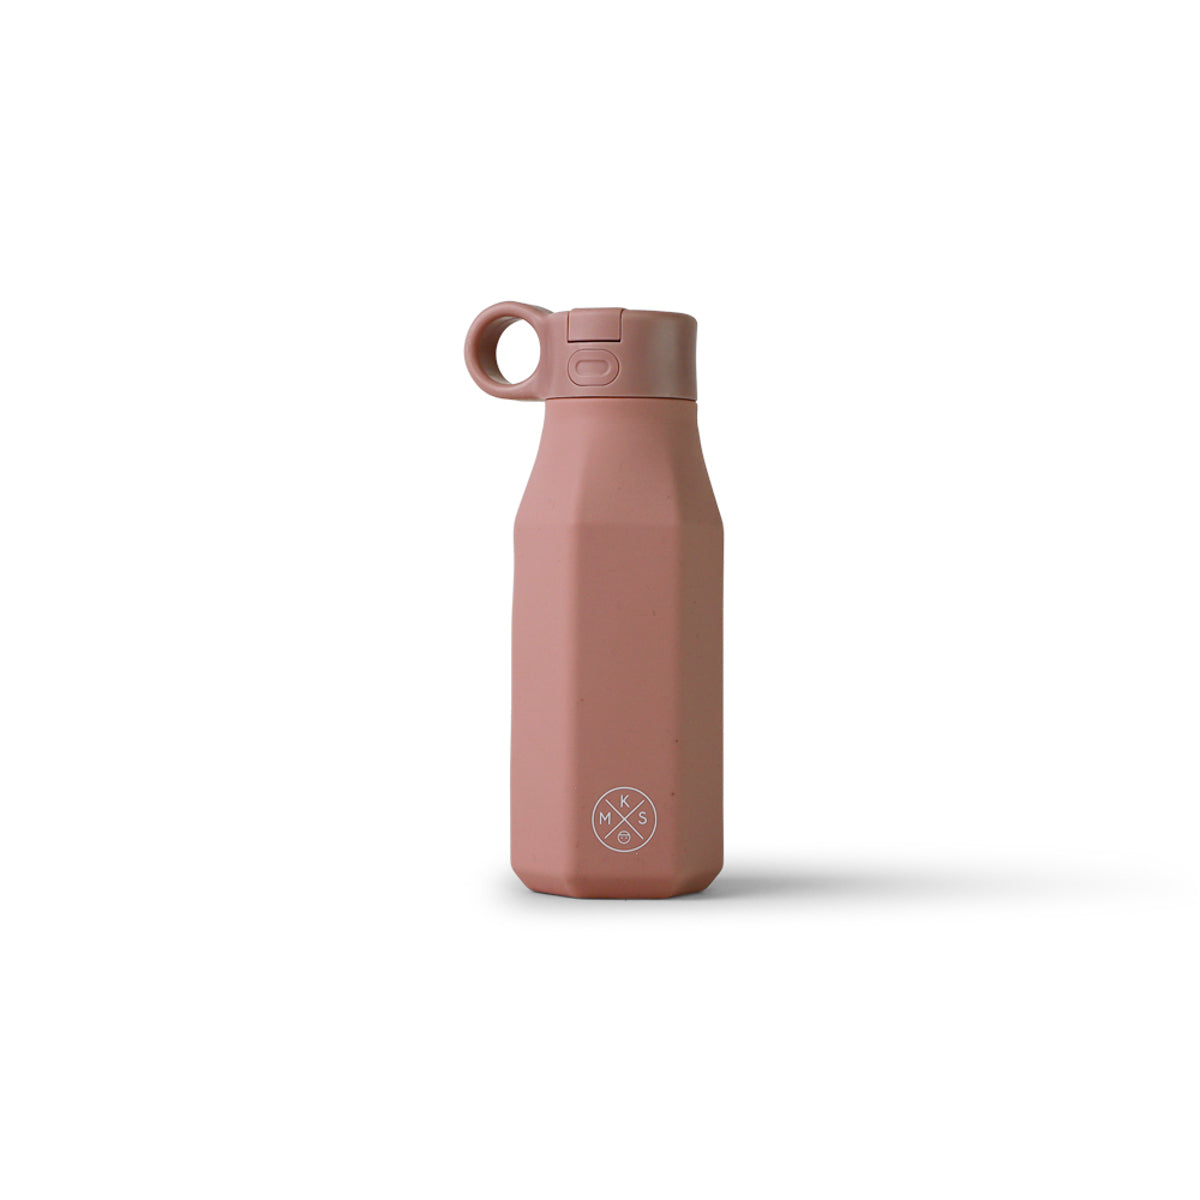 Durable, easy to clean, durable, a perfect on-the-go water bottle in soft matte food grade silicone BPA free with straw lid and handle on the top. Must have at school, while traveling or simply at home. For kids and adults. MKS Miminoo Arizona USA Brand. 13 colors. Wholesale Faire. Lilac for girls. 